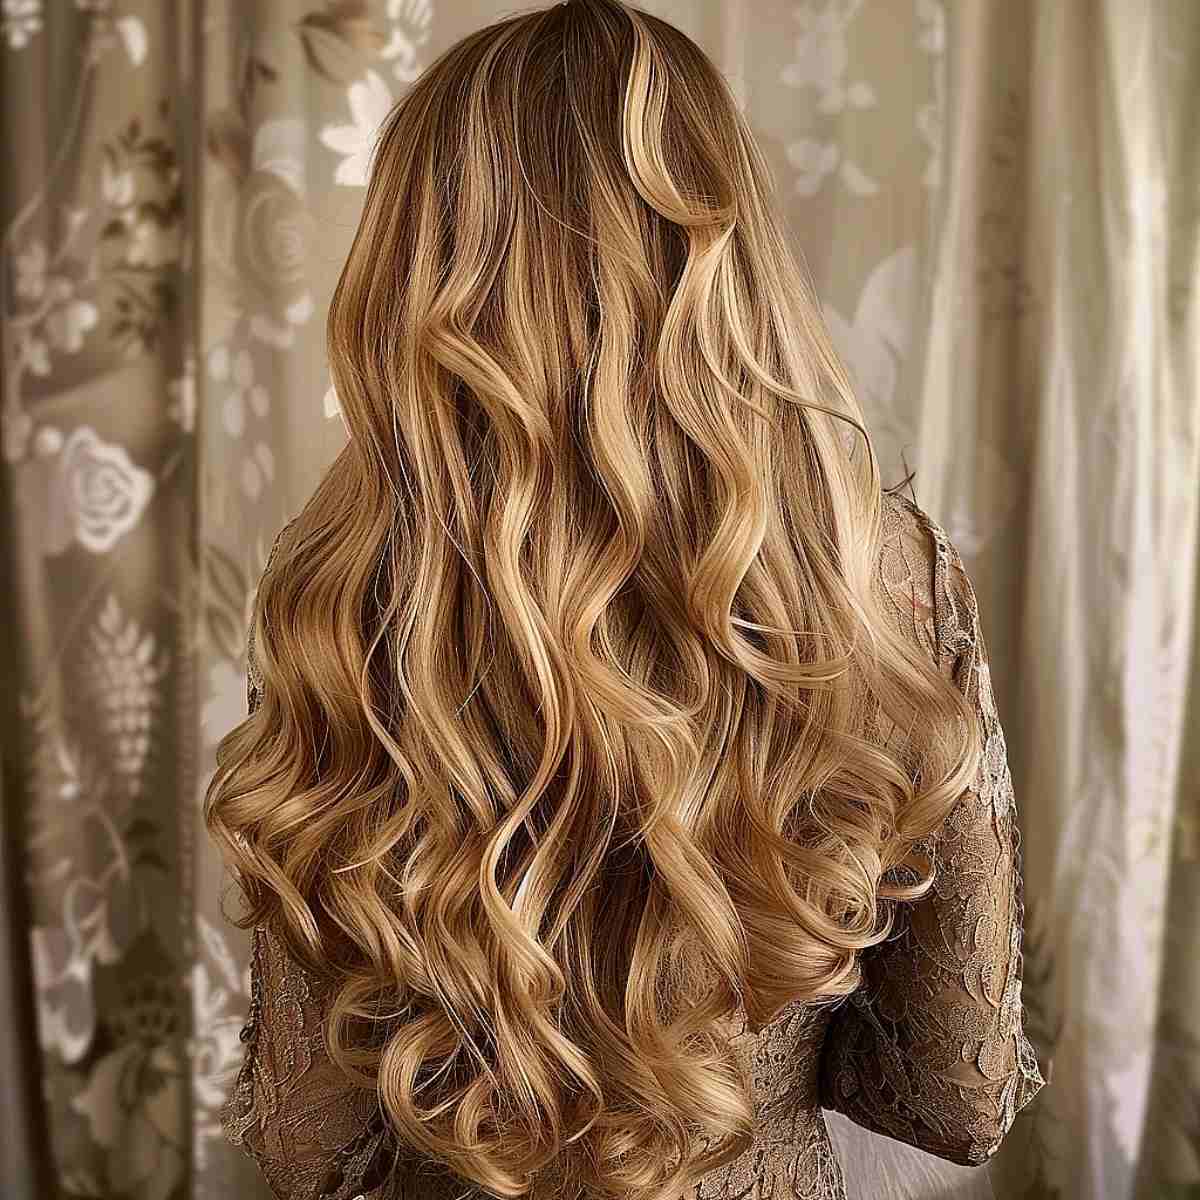 33 Gorgeous New Year's Hairstyle Ideas and Inspiration for 2022